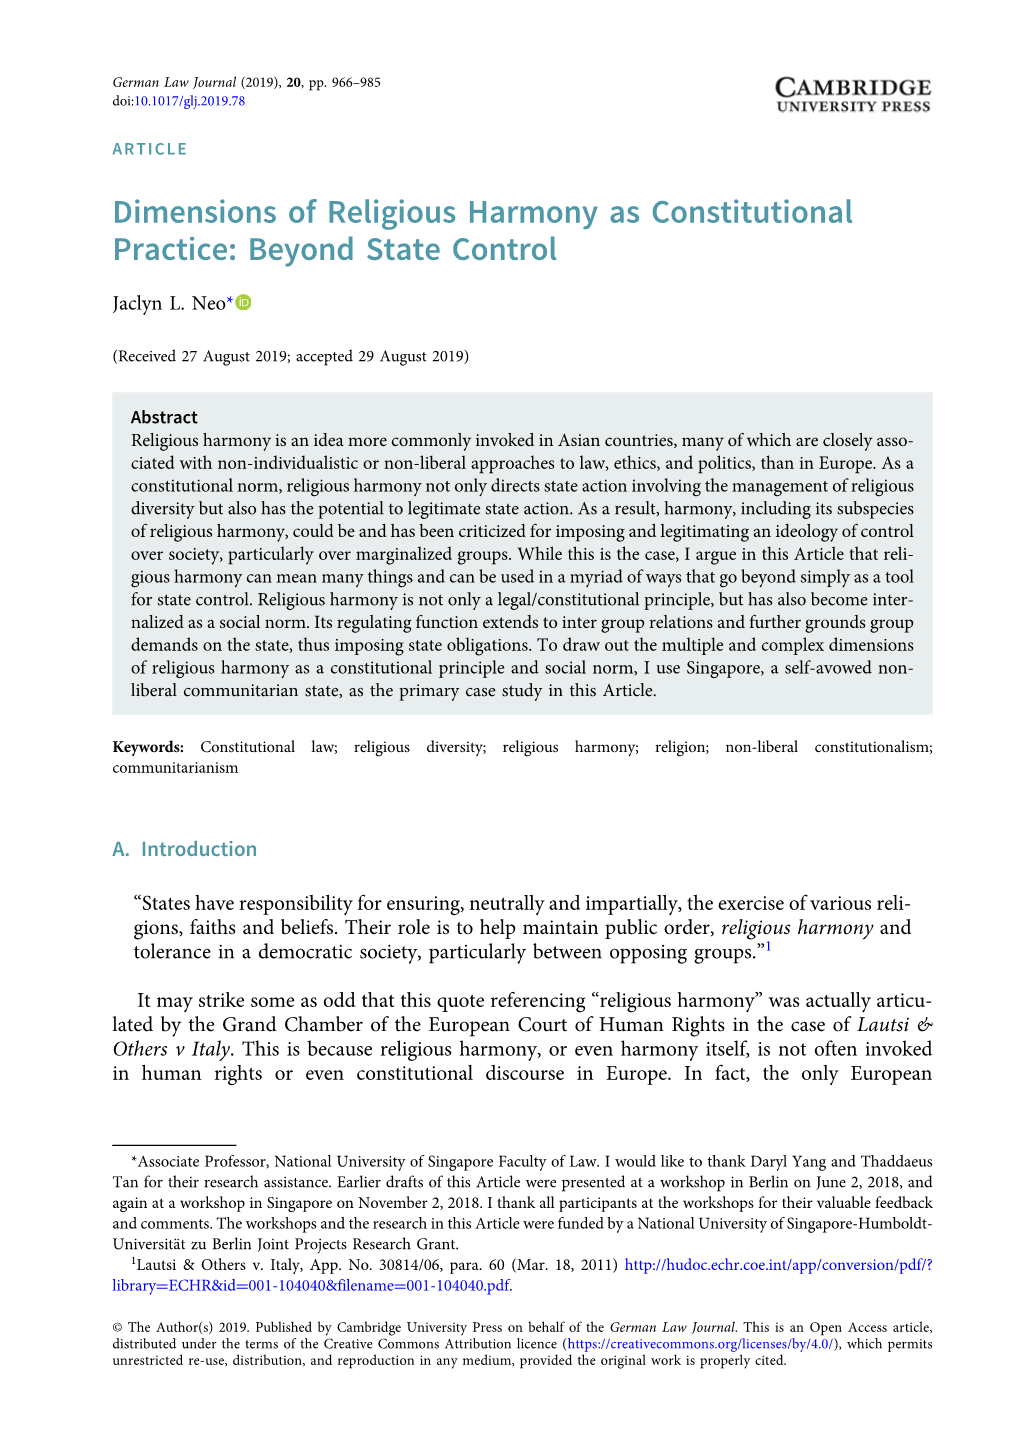 Dimensions of Religious Harmony As Constitutional Practice: Beyond State Control